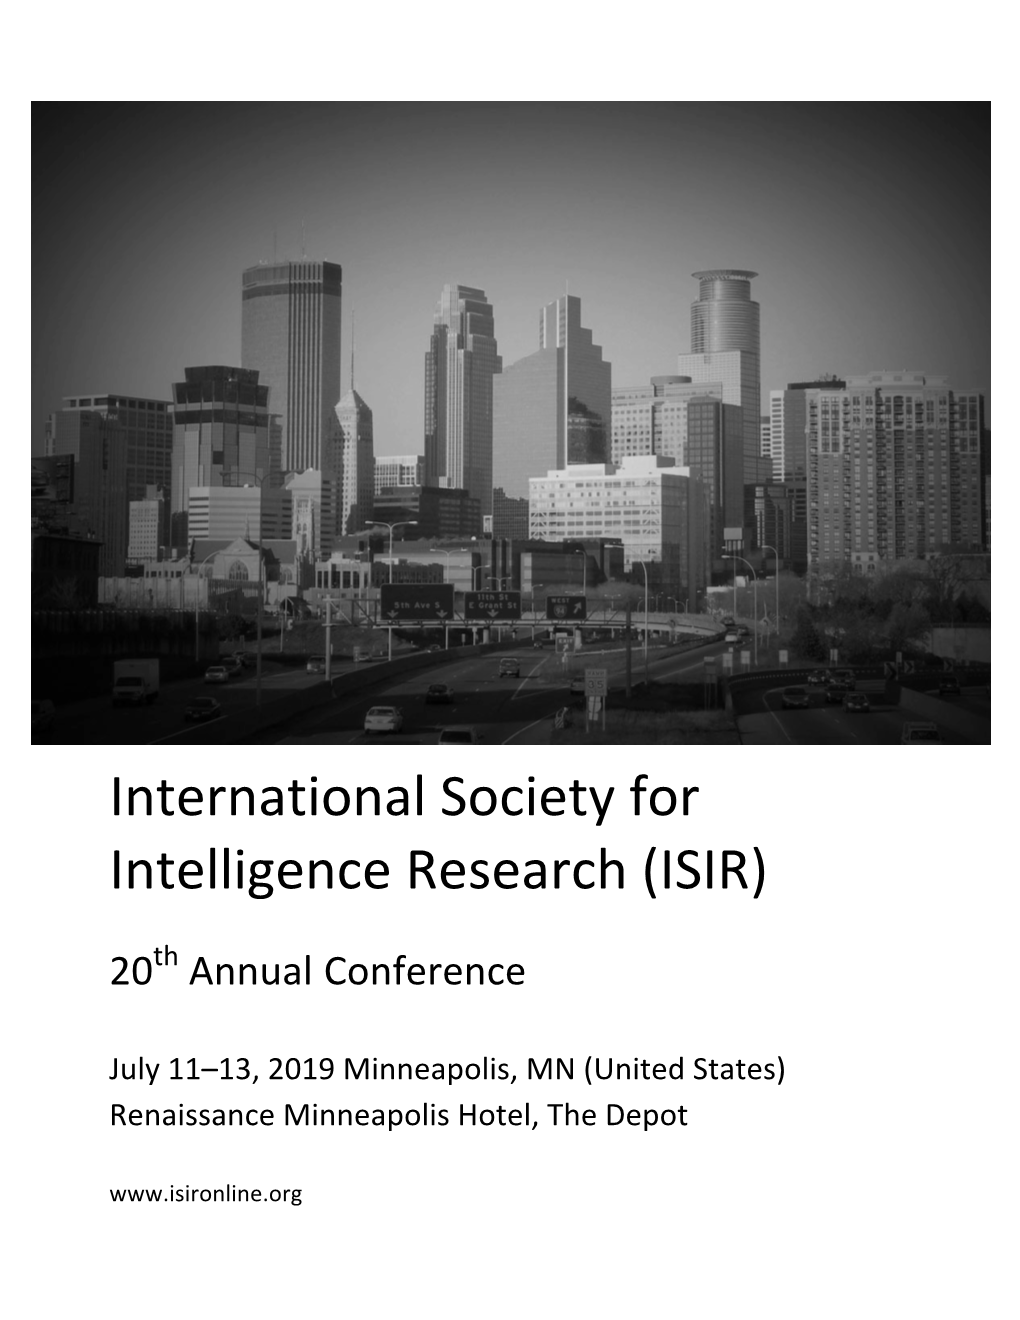 International Society for Intelligence Research (ISIR)